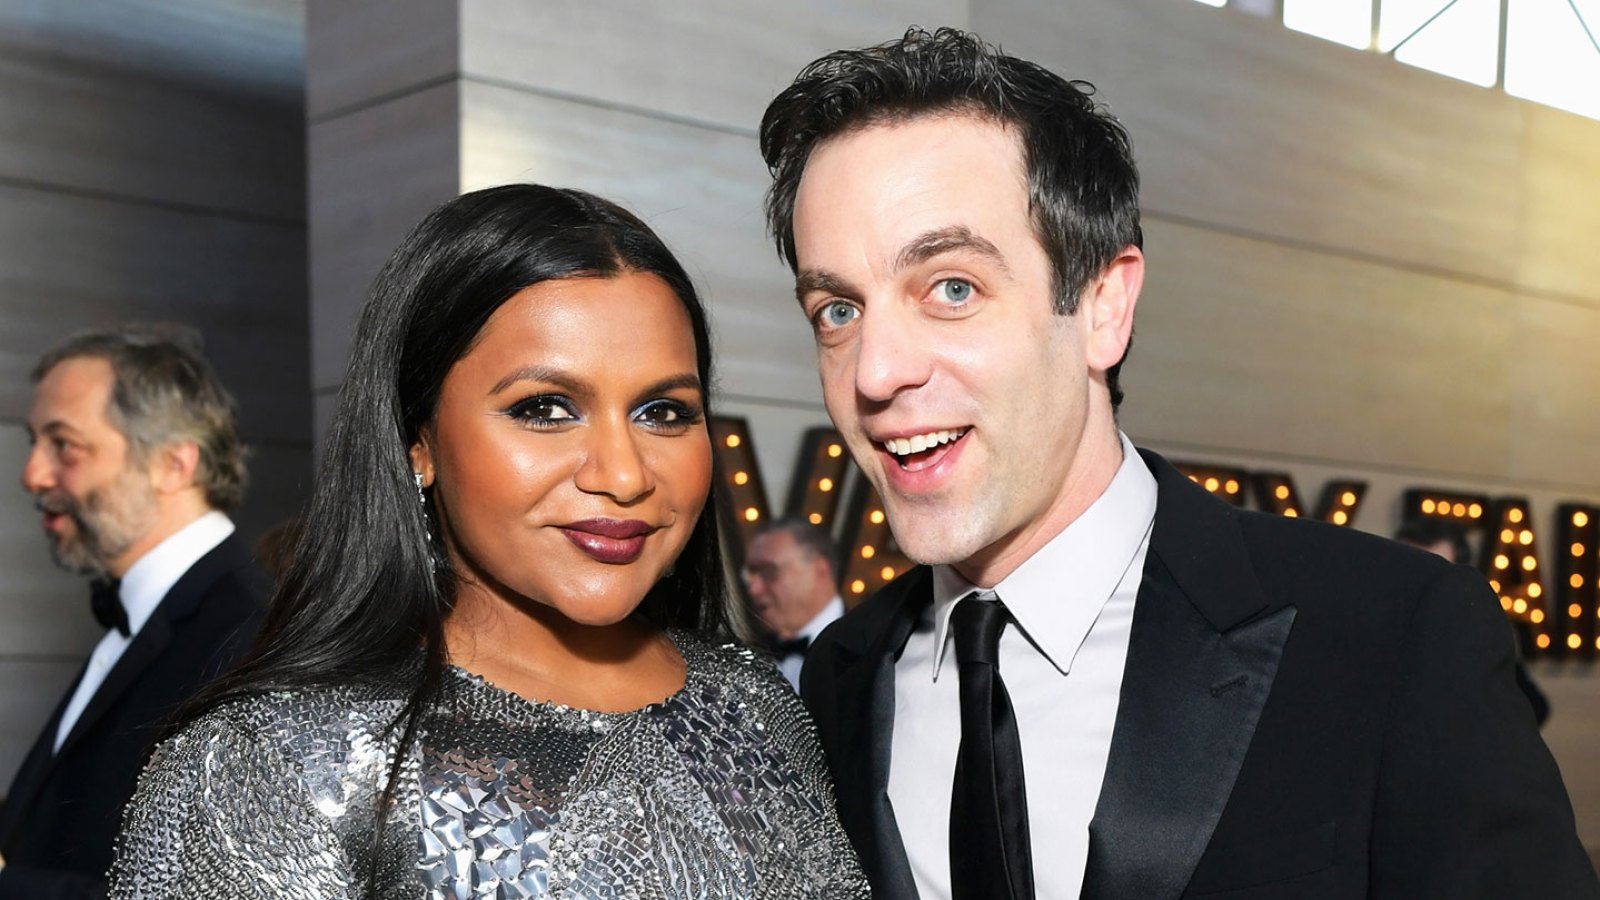 Mindy Kaling Reveals B.J. Novak Is Her Daughter's Godfather: 'He Truly Is Just a Part of My Family'